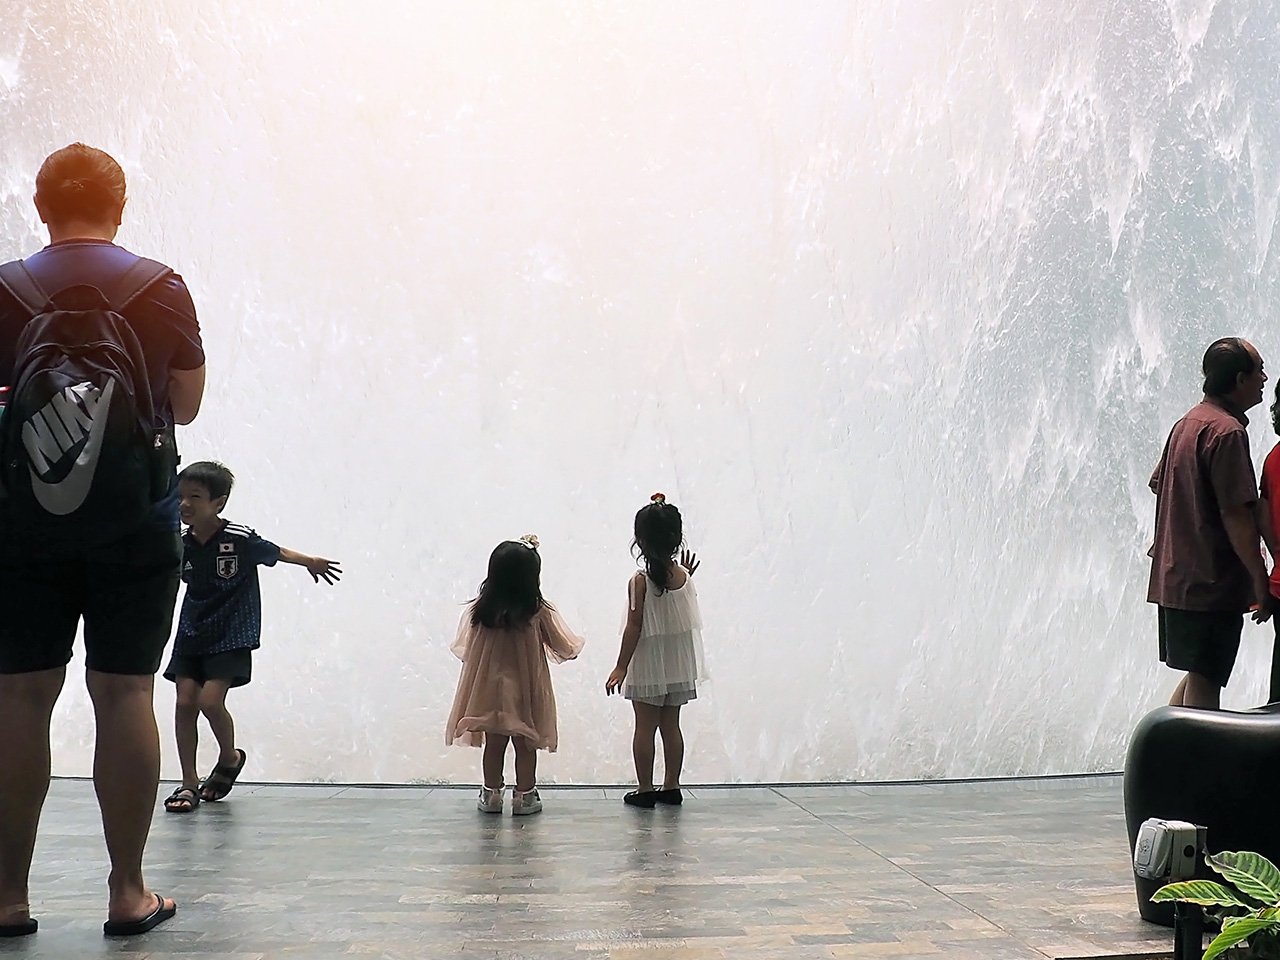 kids touching a fountain at Singapore's Changi busiest airport